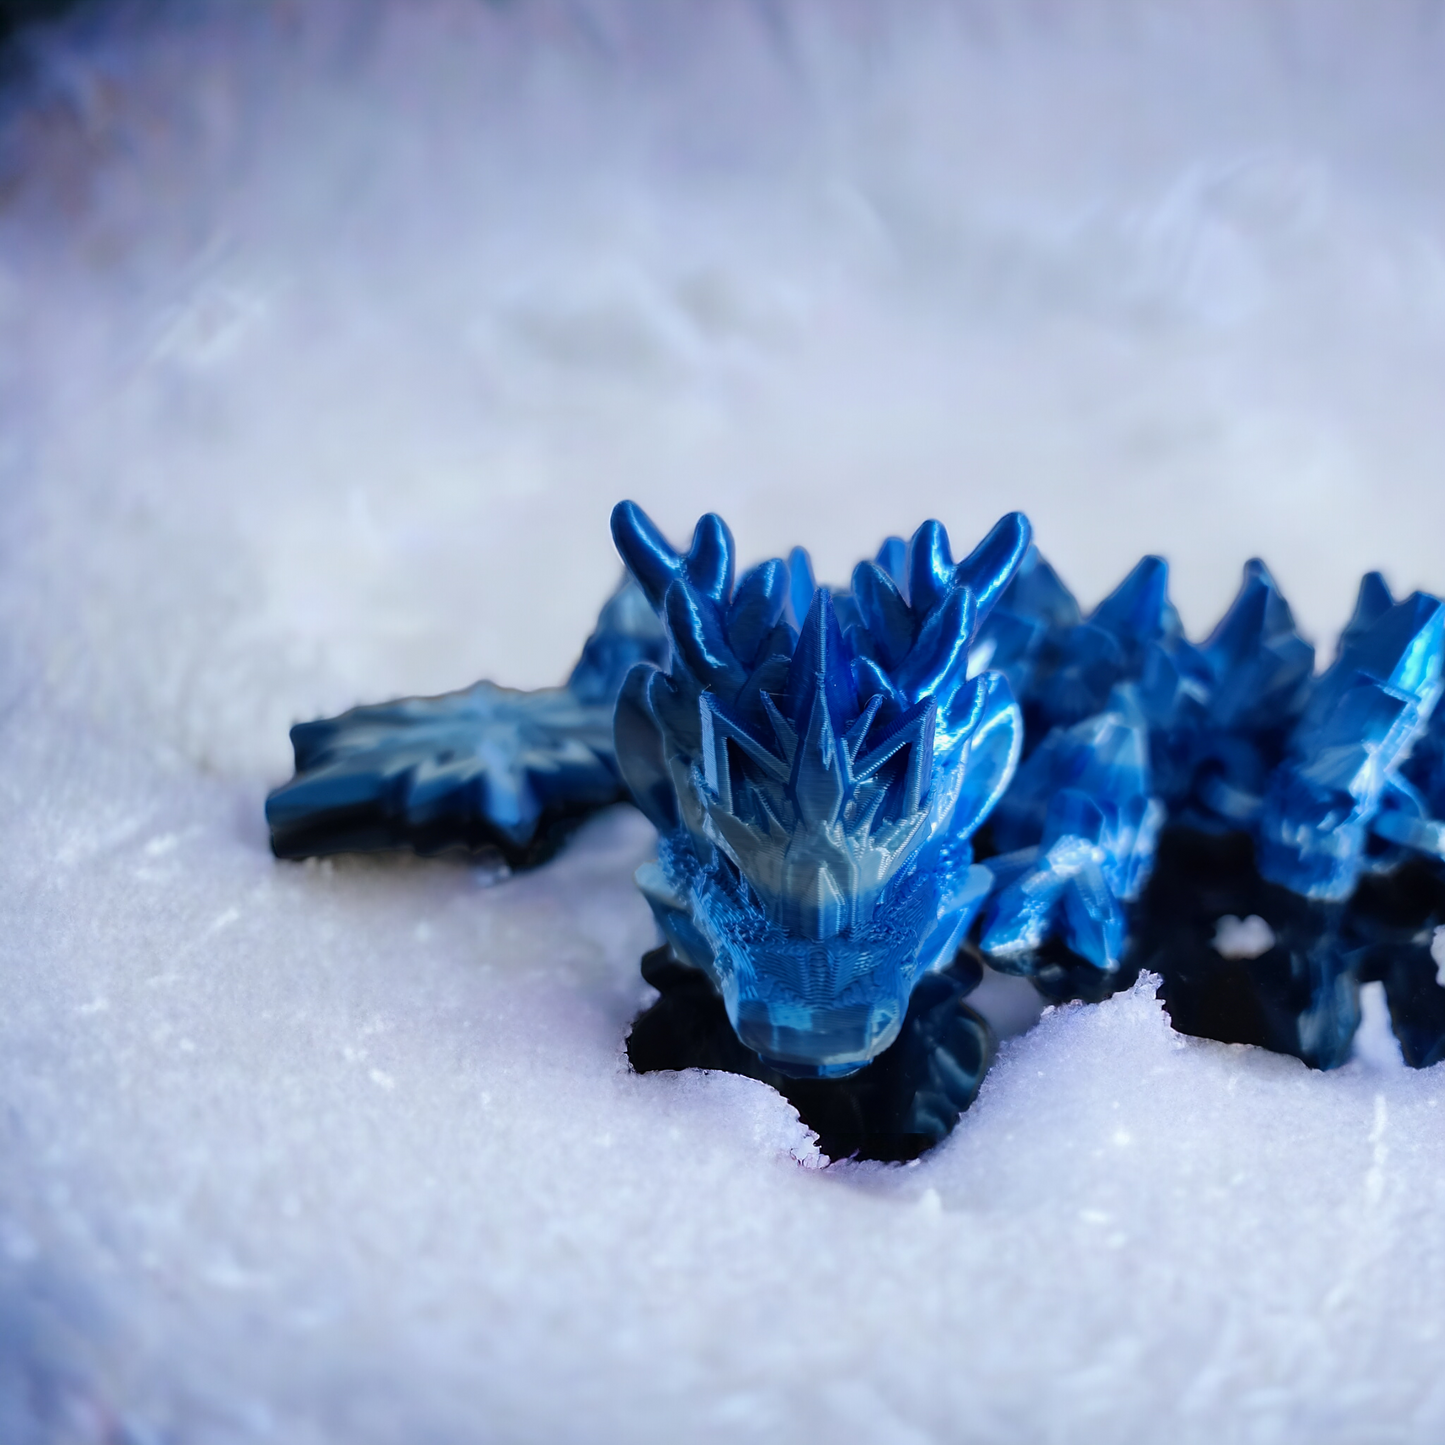 3d print, Winter dragon, Reindeer dragon, snowflake, articulated, birthday, glow in the dark, child toy, holiday gift, gift for her, season